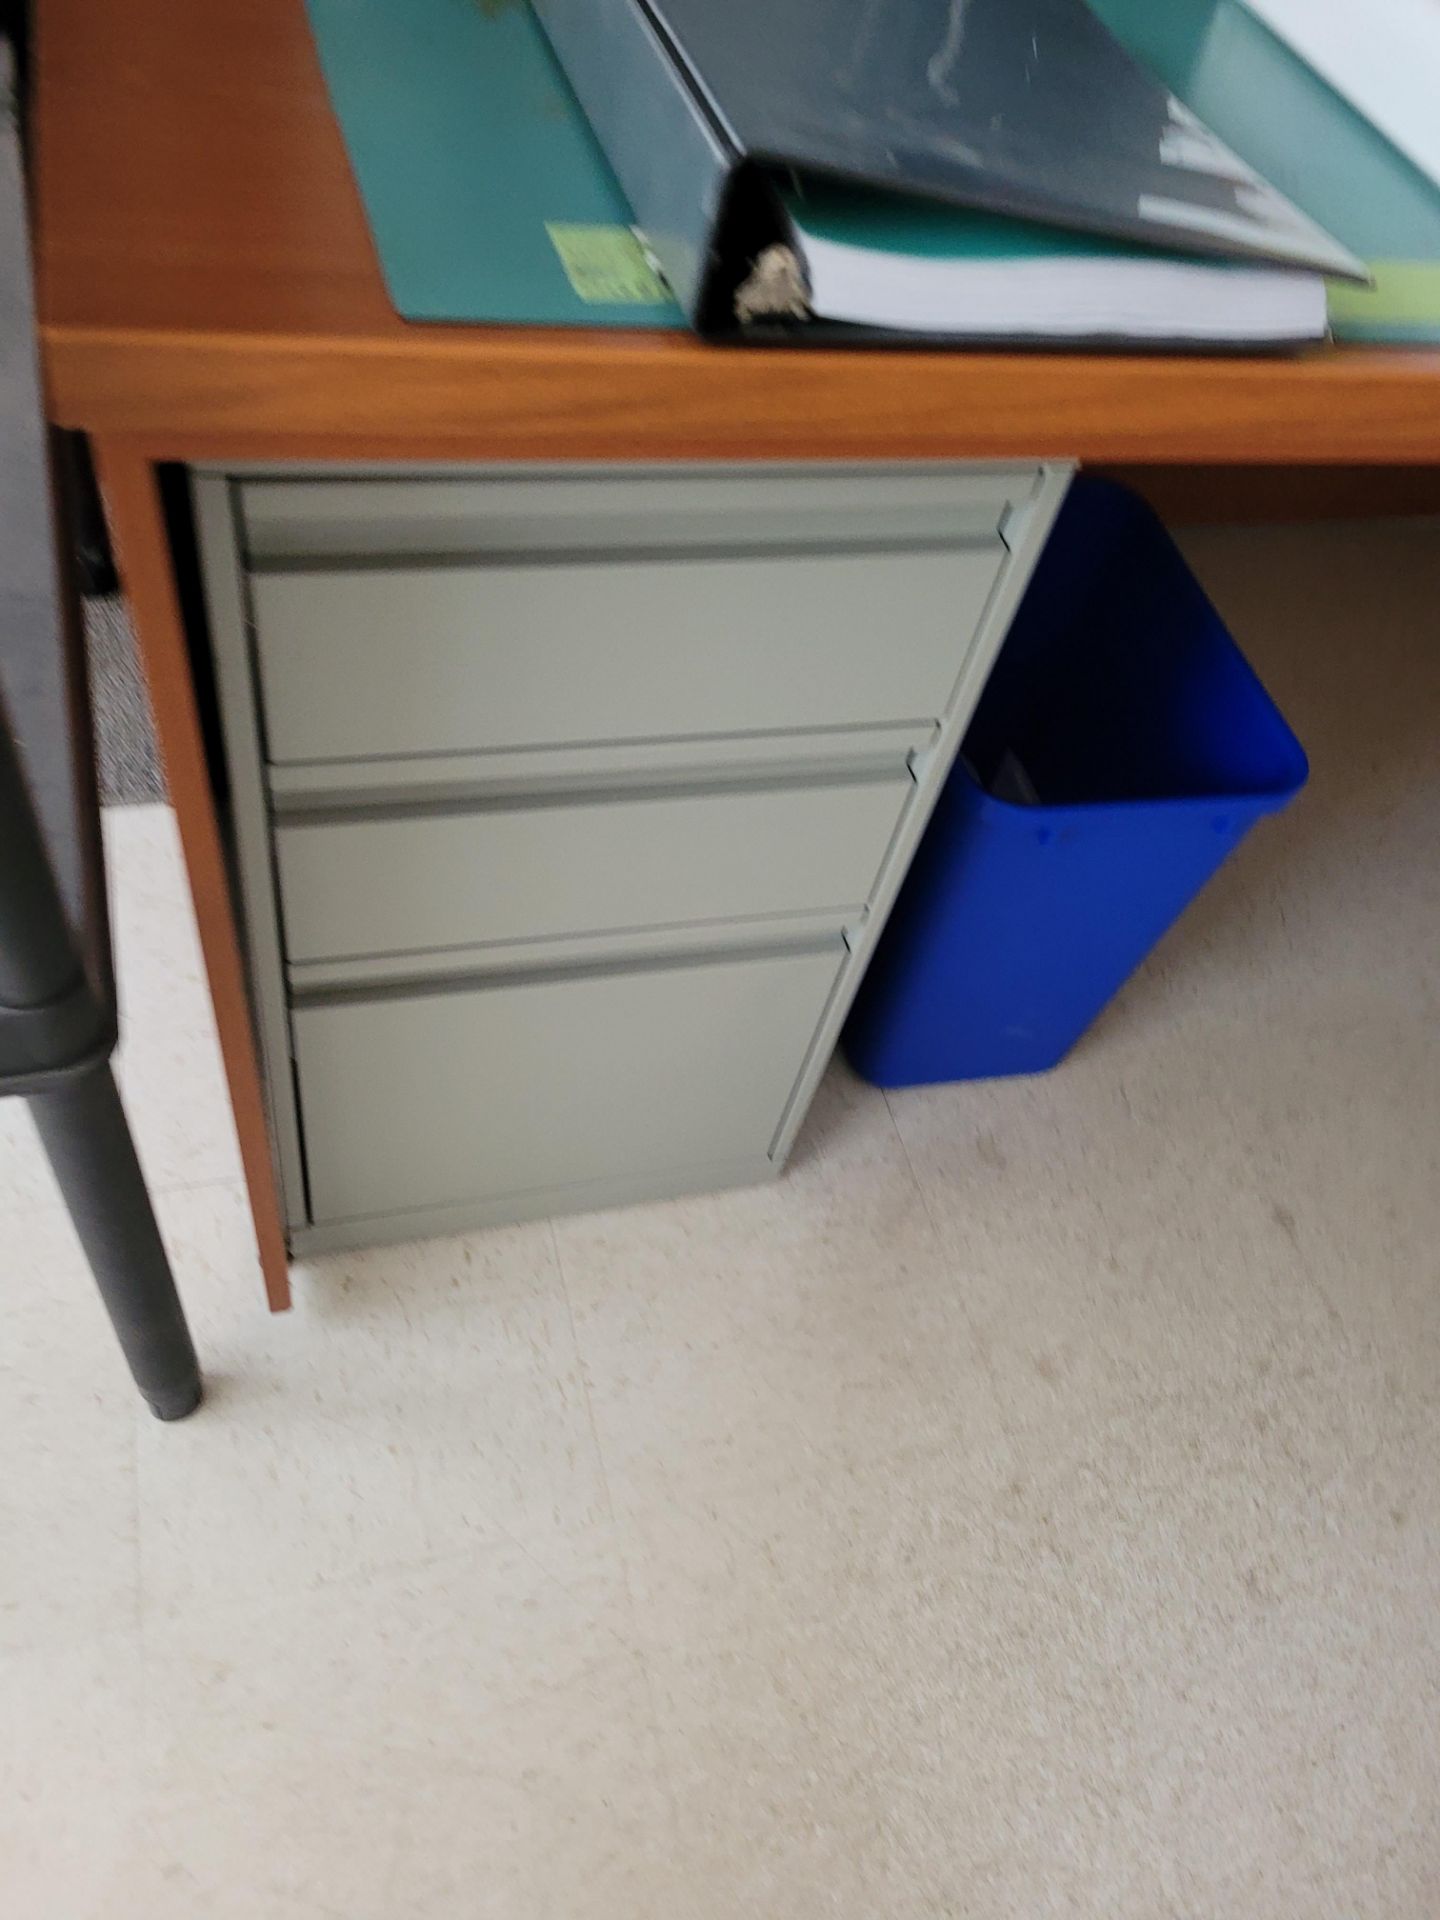 Lot of office furniture incl. U-shape office desk with credenza, filing cabinet, chair, table, shelf - Image 6 of 7